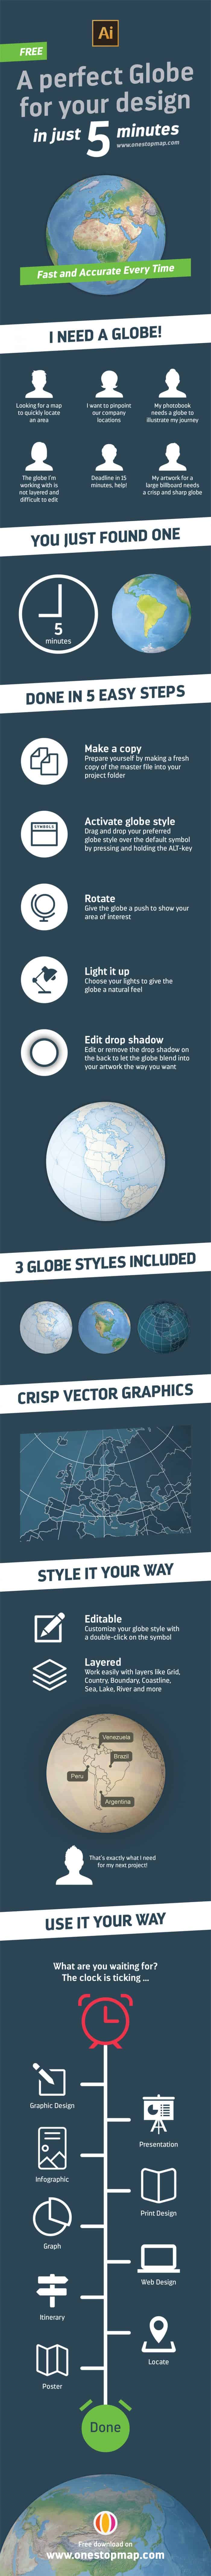 A Perfect Globe For Your Design Infographic